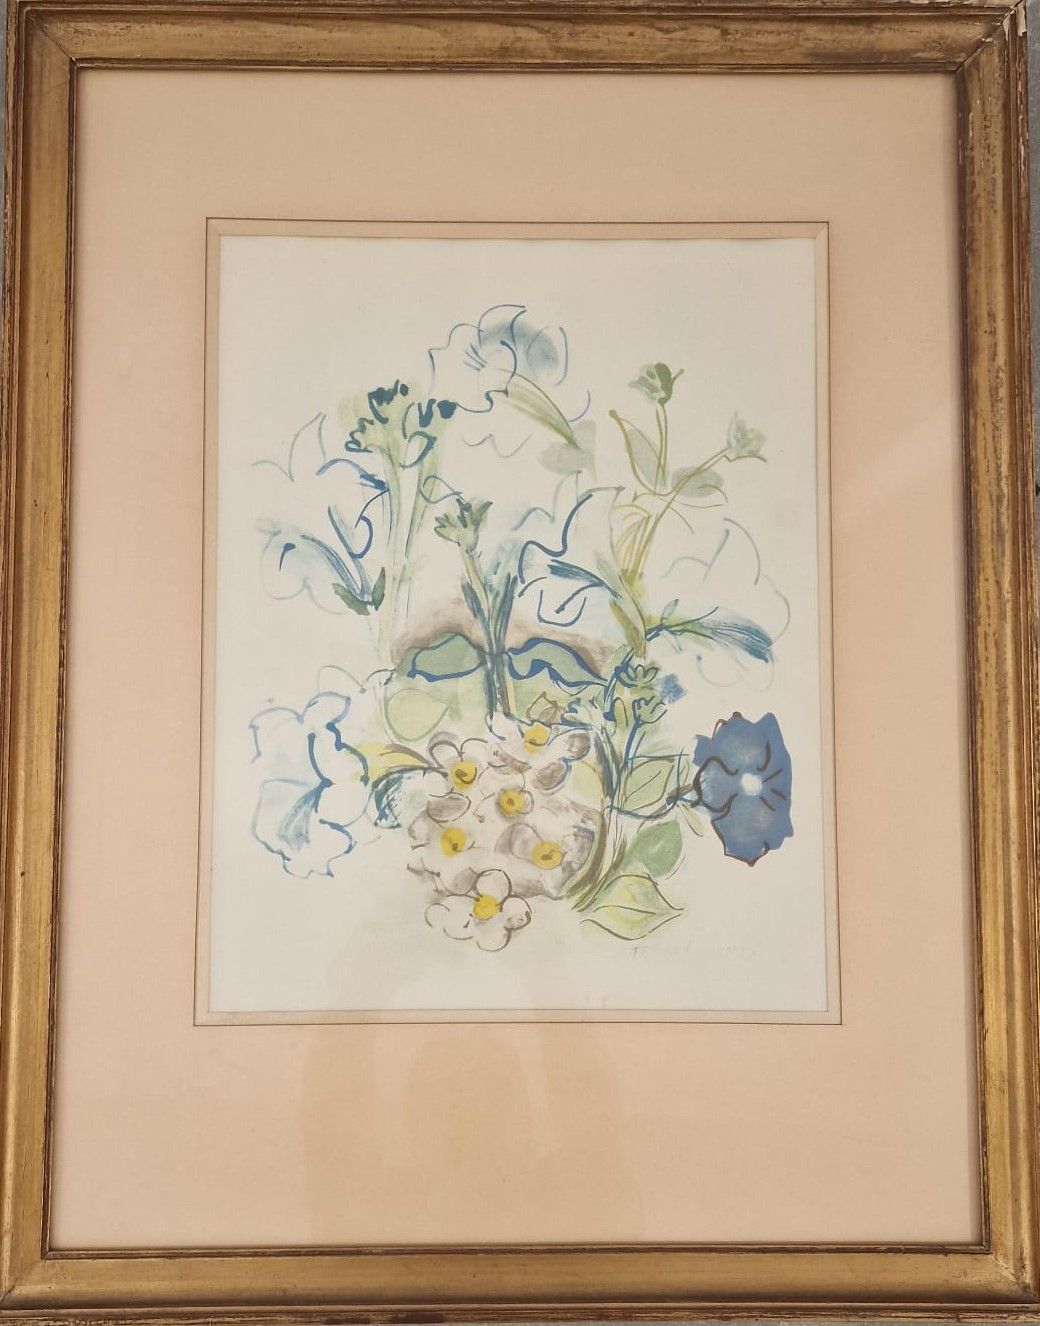 Null Raoul DUFY (1877-1953)

Flowers

Lithograph

Signed lower right

38 x 30 cm